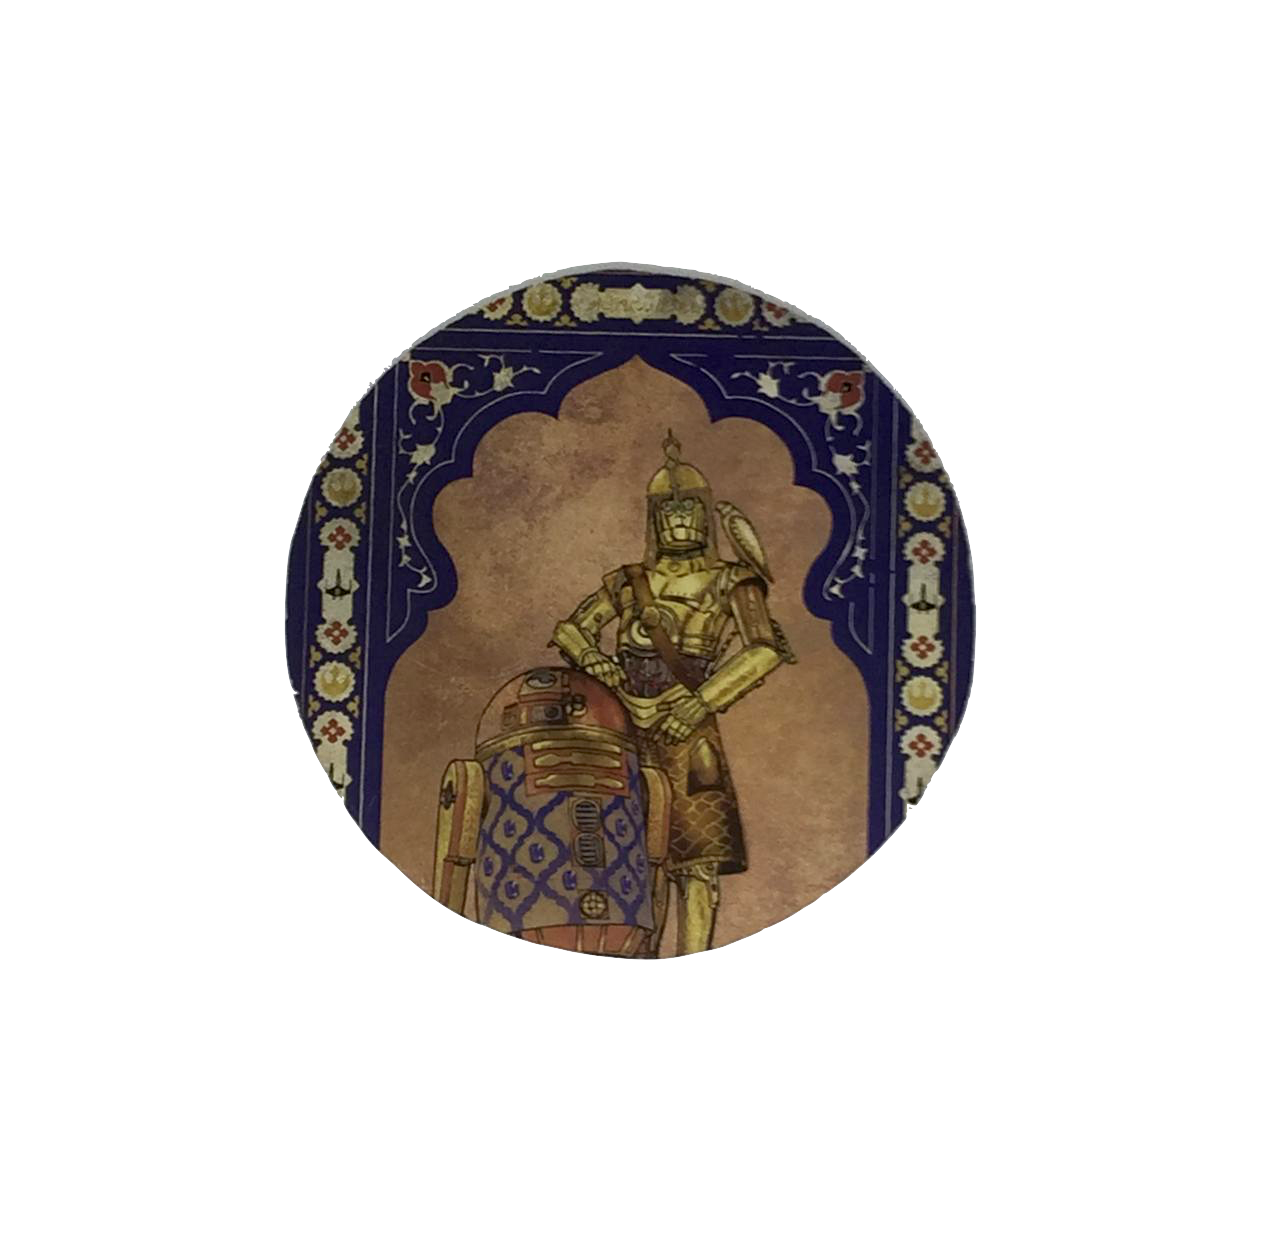 Star Wars Mughal Coaster- R2D2 and C3PO